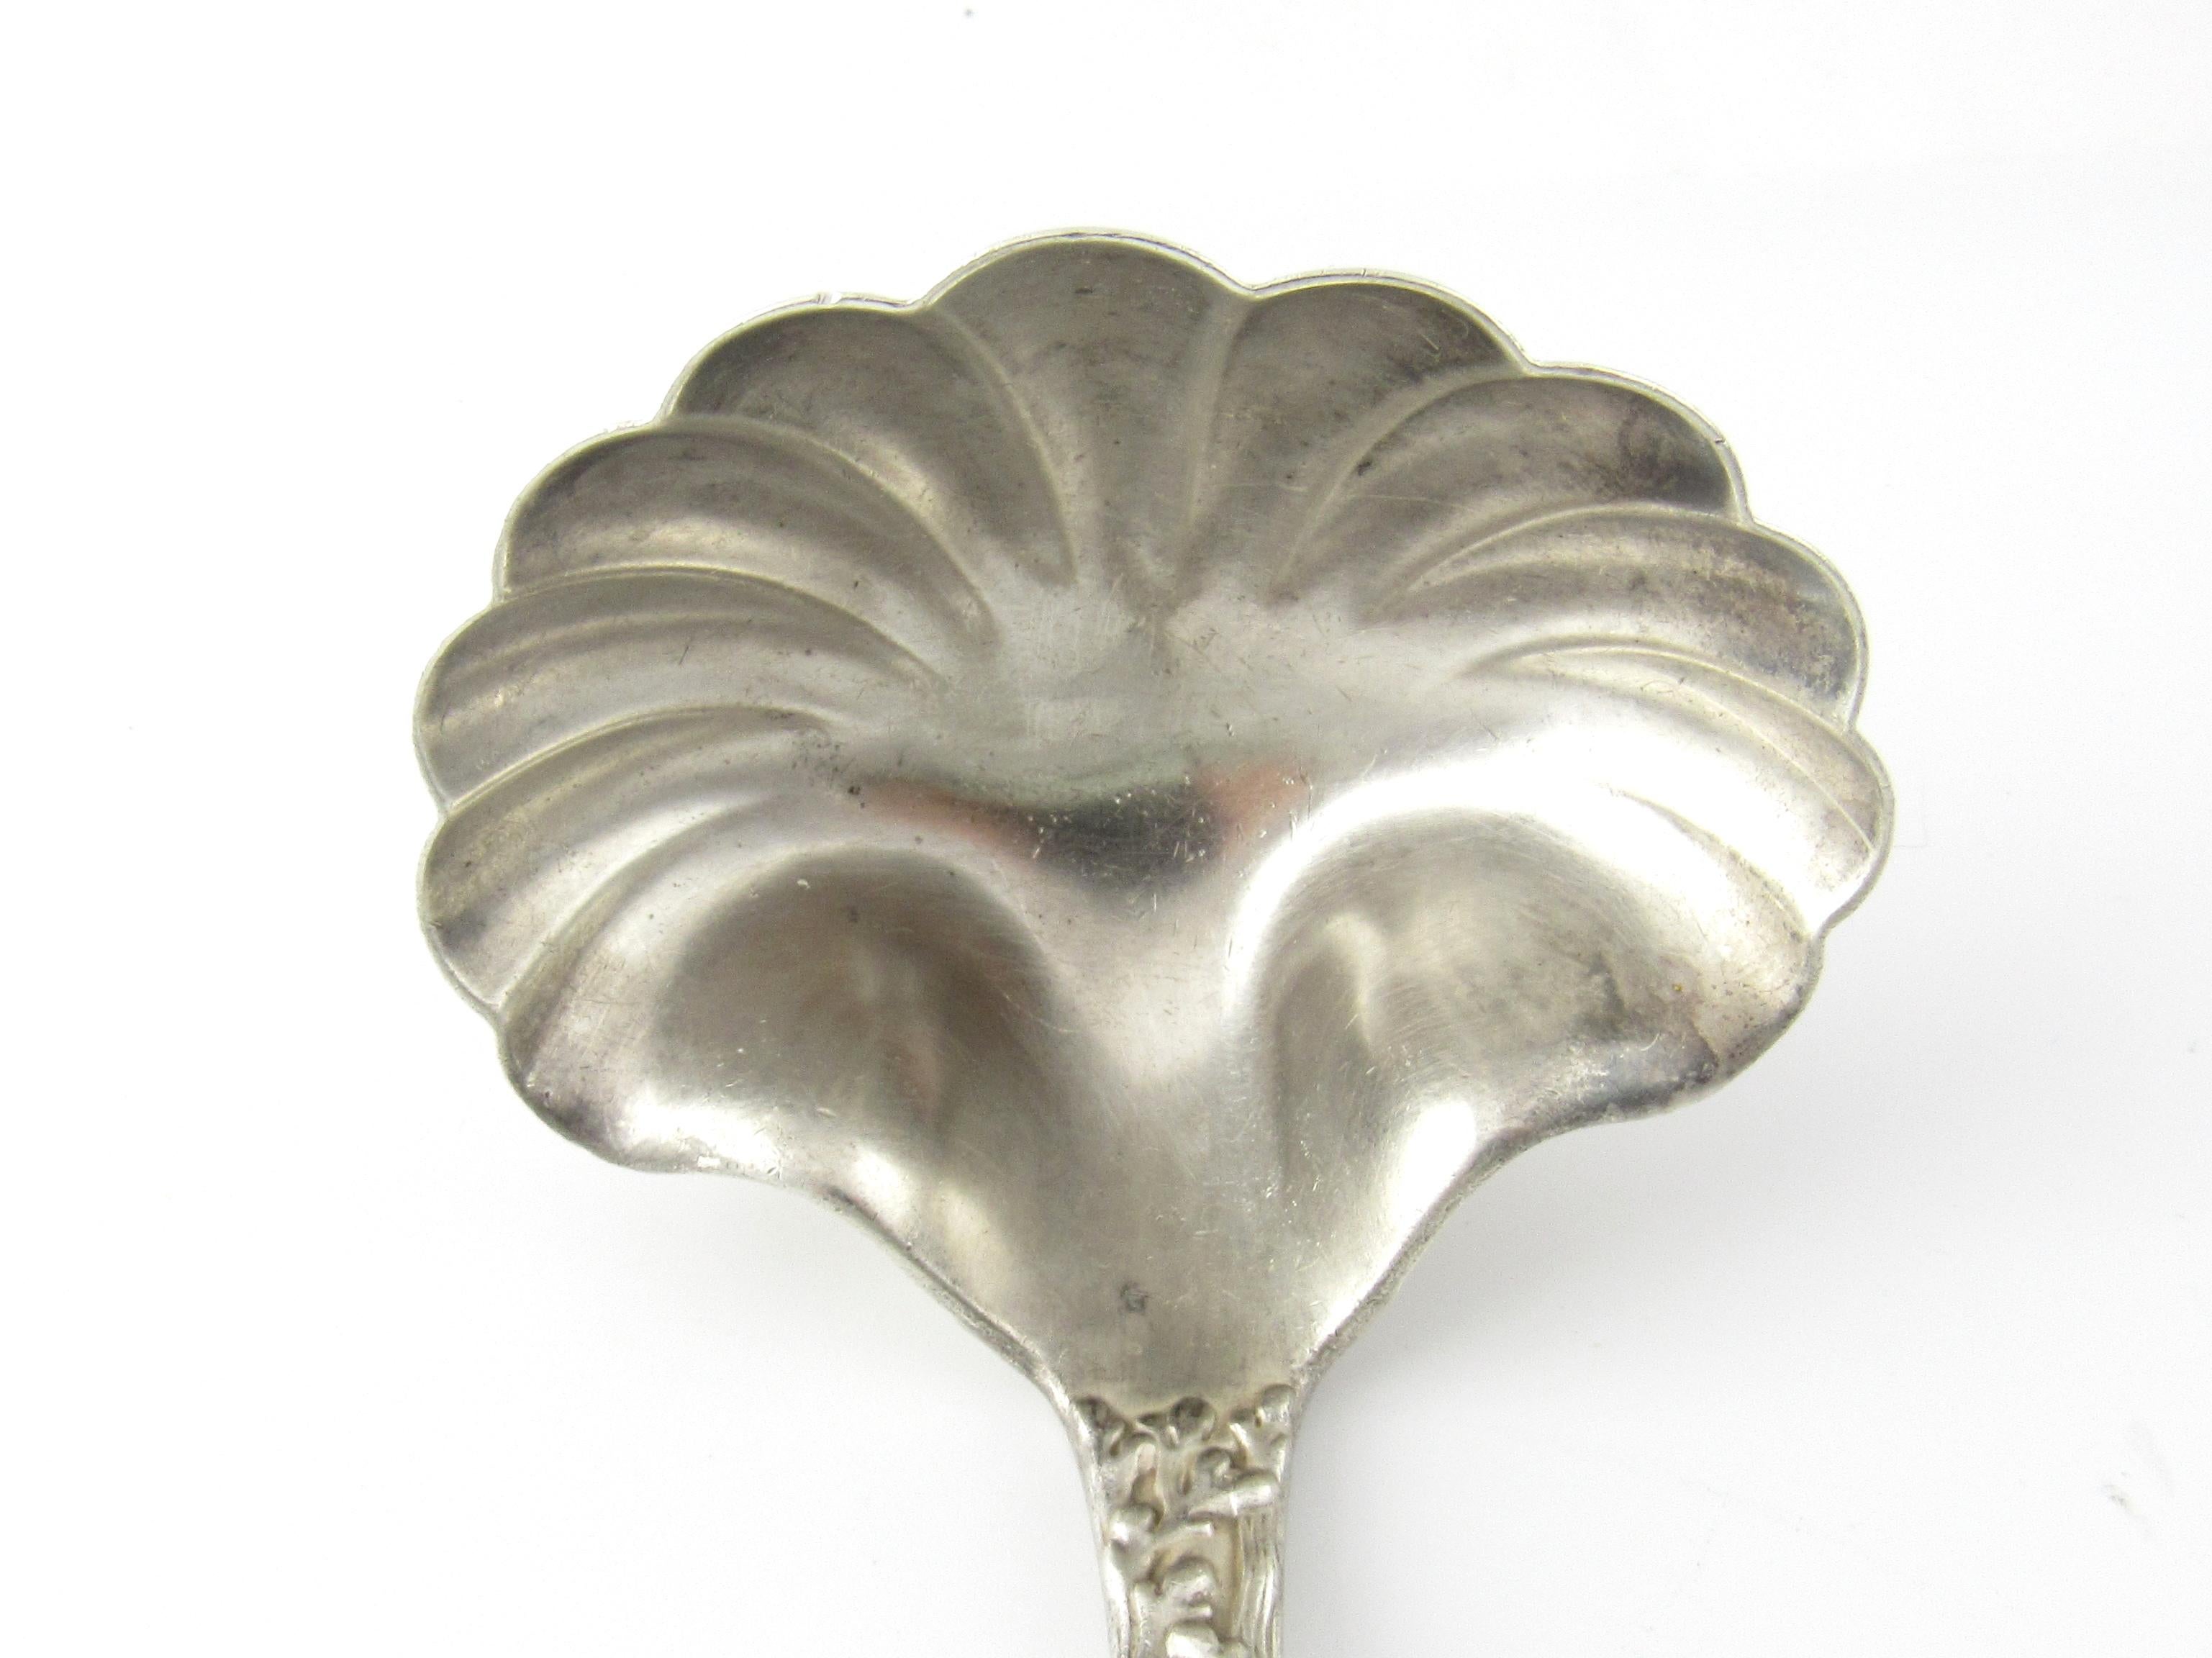 Tiffany & Co Wave Edge Sterling Silver Ladle with Monogram

This is a sterling silver soup ladle with shell bowl in the wave edge pattern made by Tiffany & CO.

Measurement: Measures 7 inches long and 11/16 inches at widest part on handle. Shell